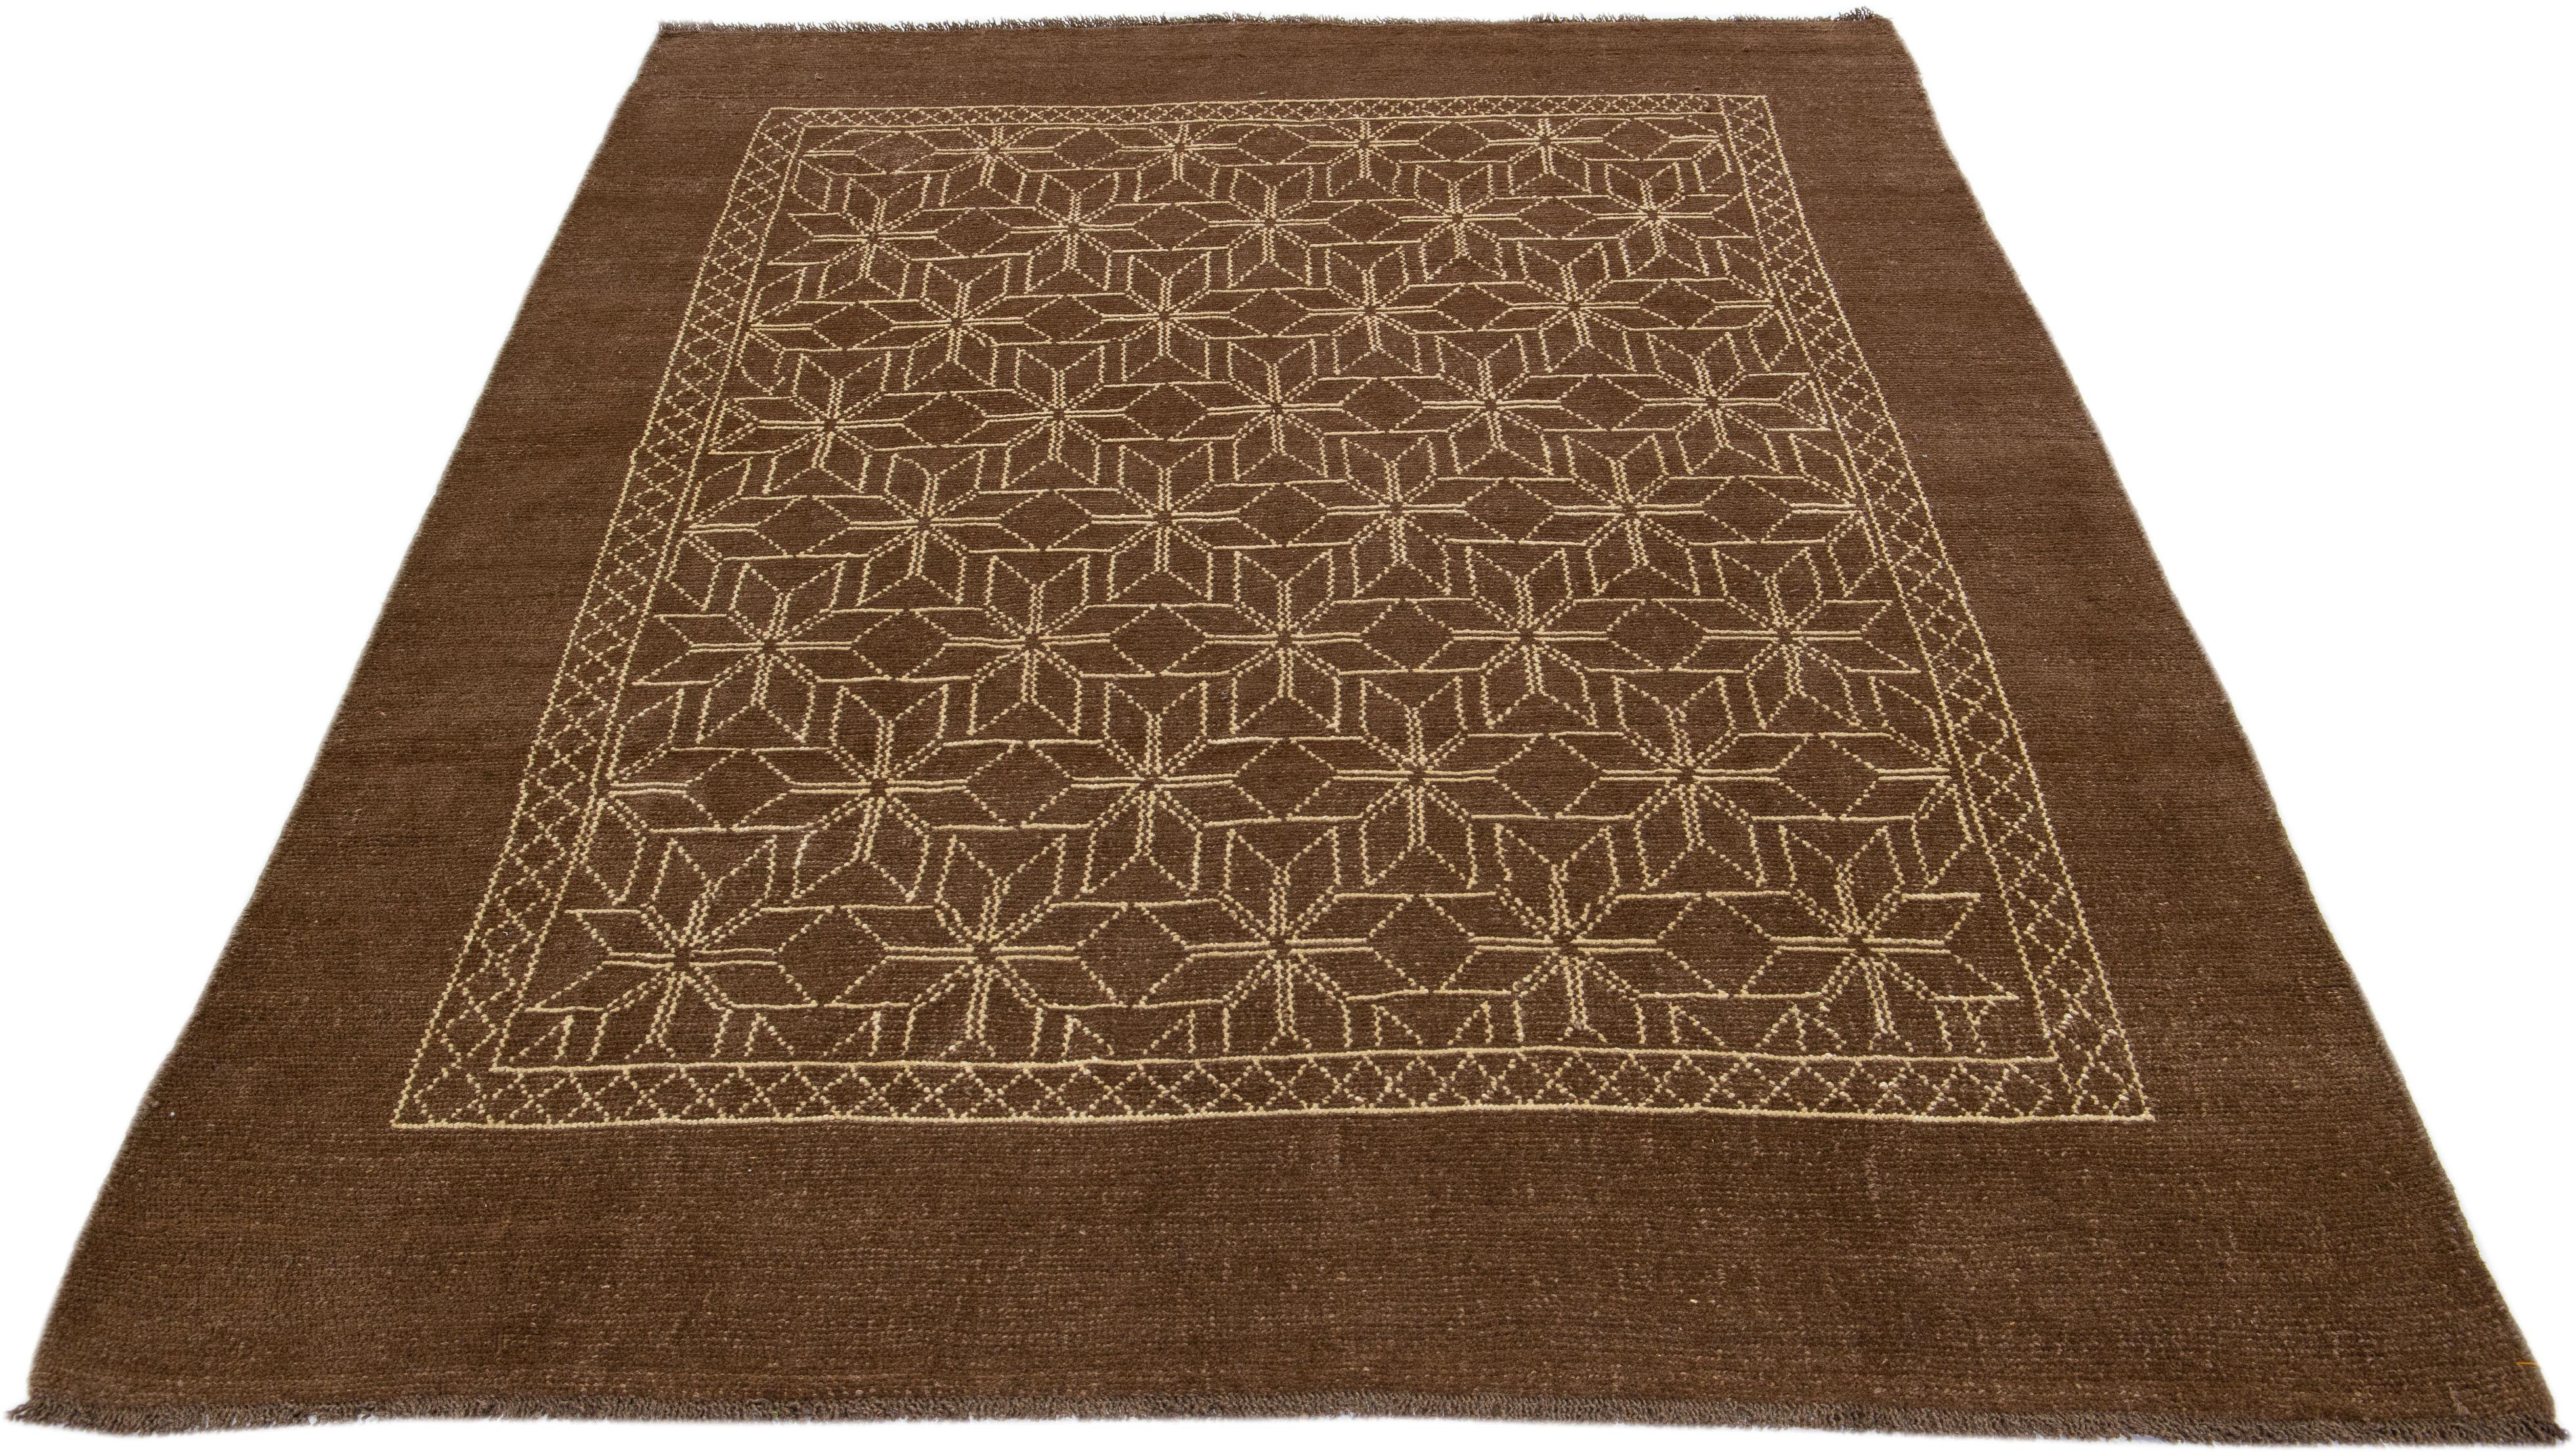 This Beautiful Moroccan-style handmade wool rug makes part of our Northwest collection and features a brown color field and beige accents in a gorgeous geometric tribal design.

This rug measures: 7'3